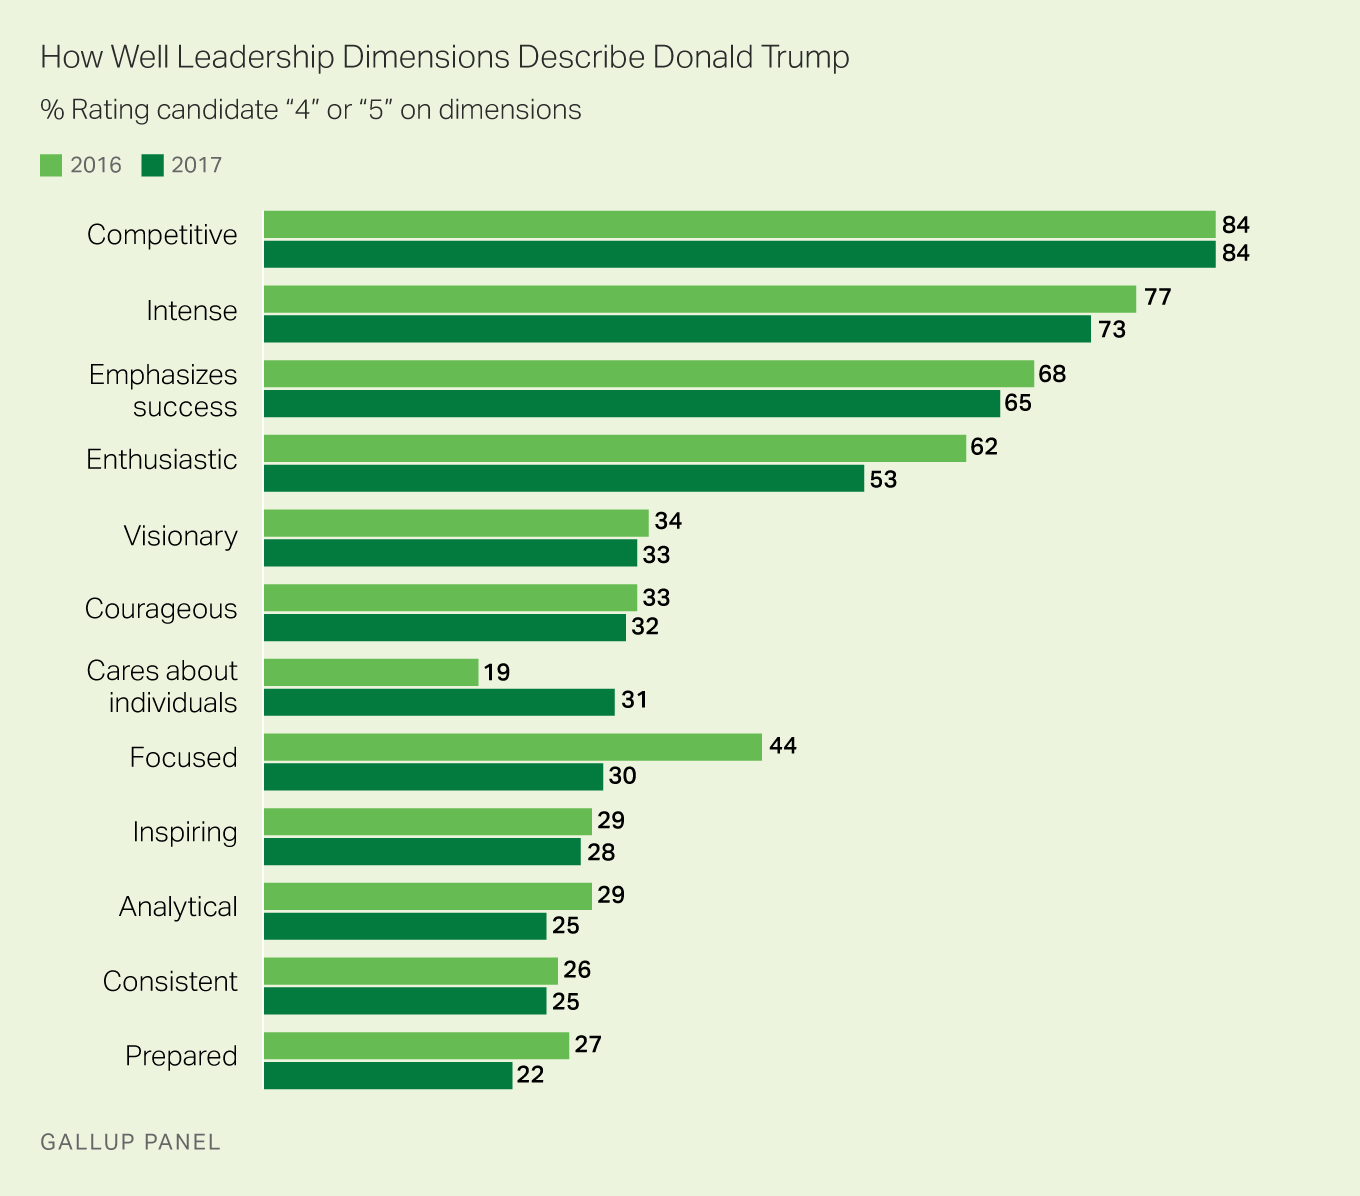 How Well Leadership Dimensions Describe Donald Trump, 2016 and 2017